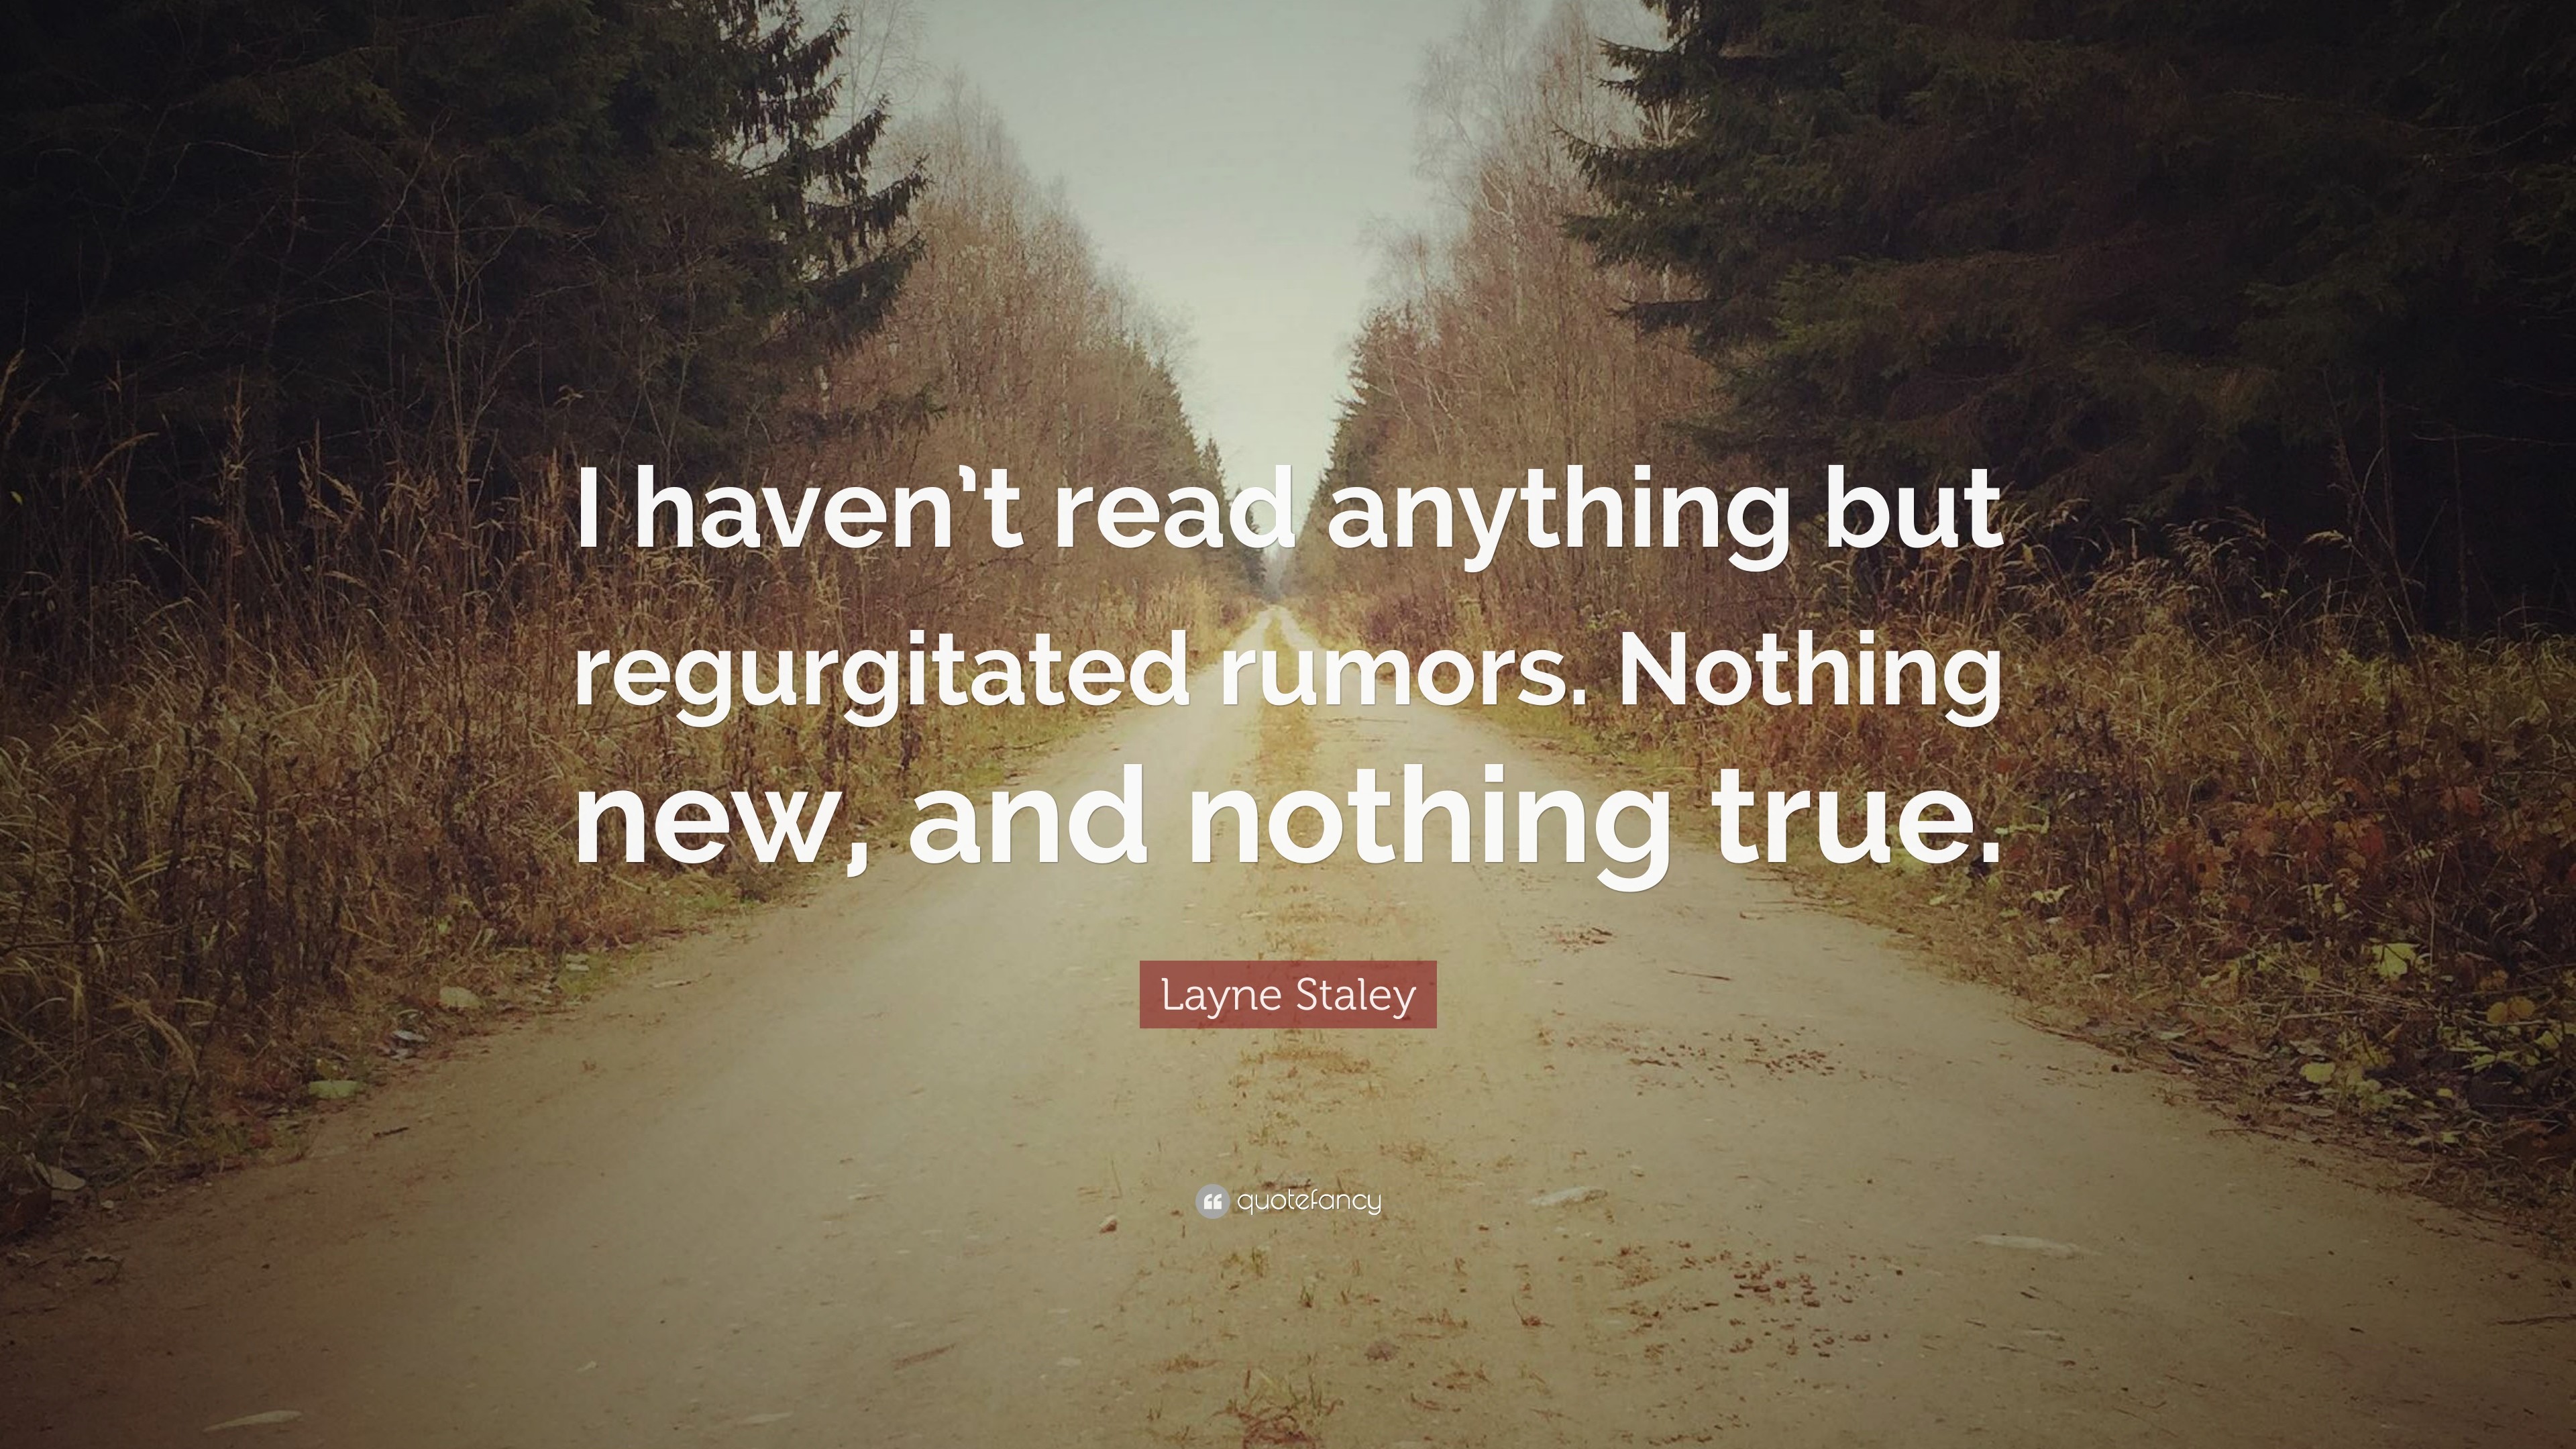 3840x2160 Layne Staley Quote: “I haven't read anything but regurgitated rumors.  Nothing